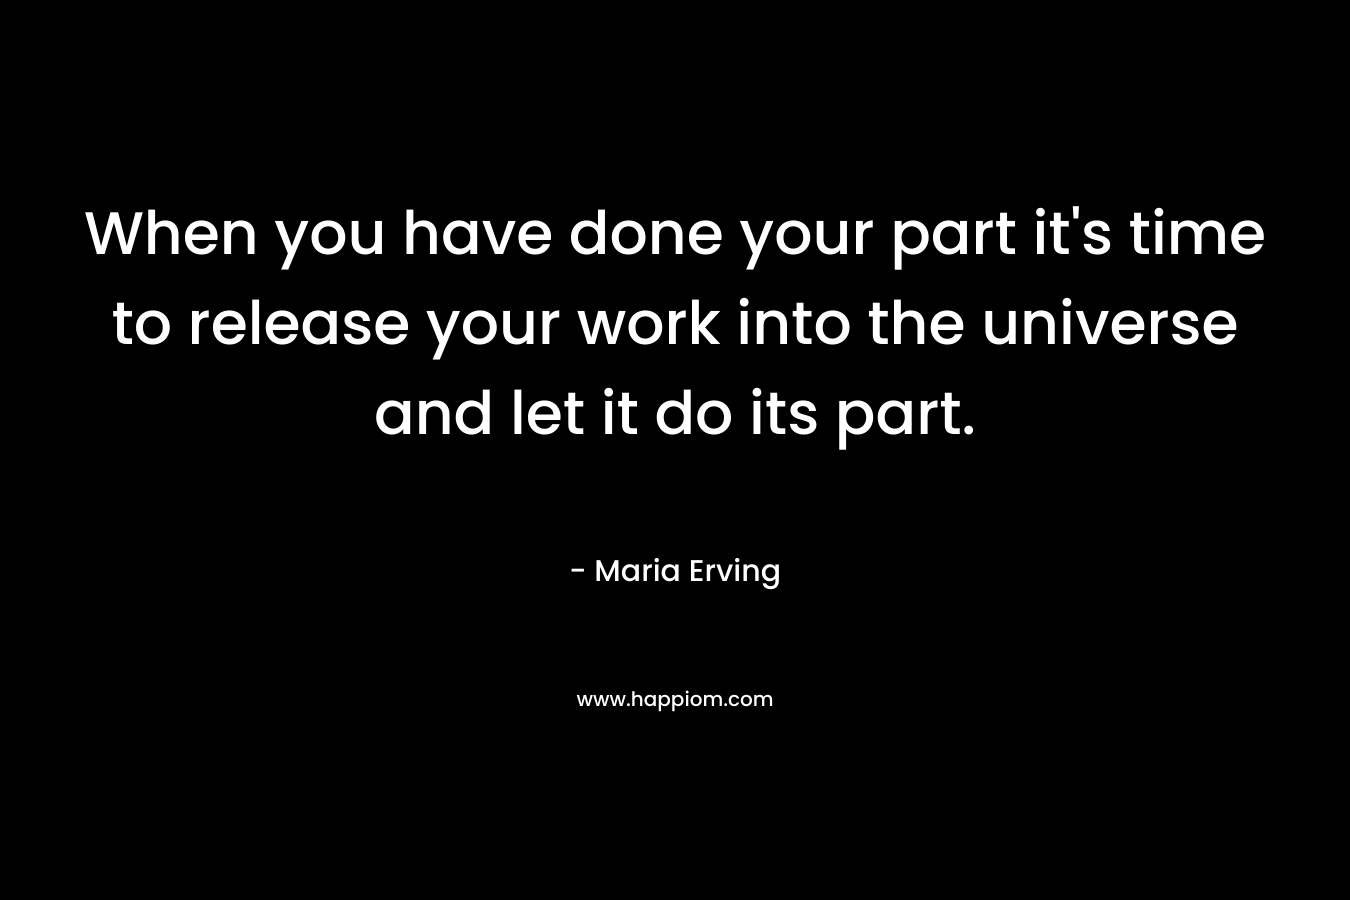 When you have done your part it’s time to release your work into the universe and let it do its part. – Maria Erving